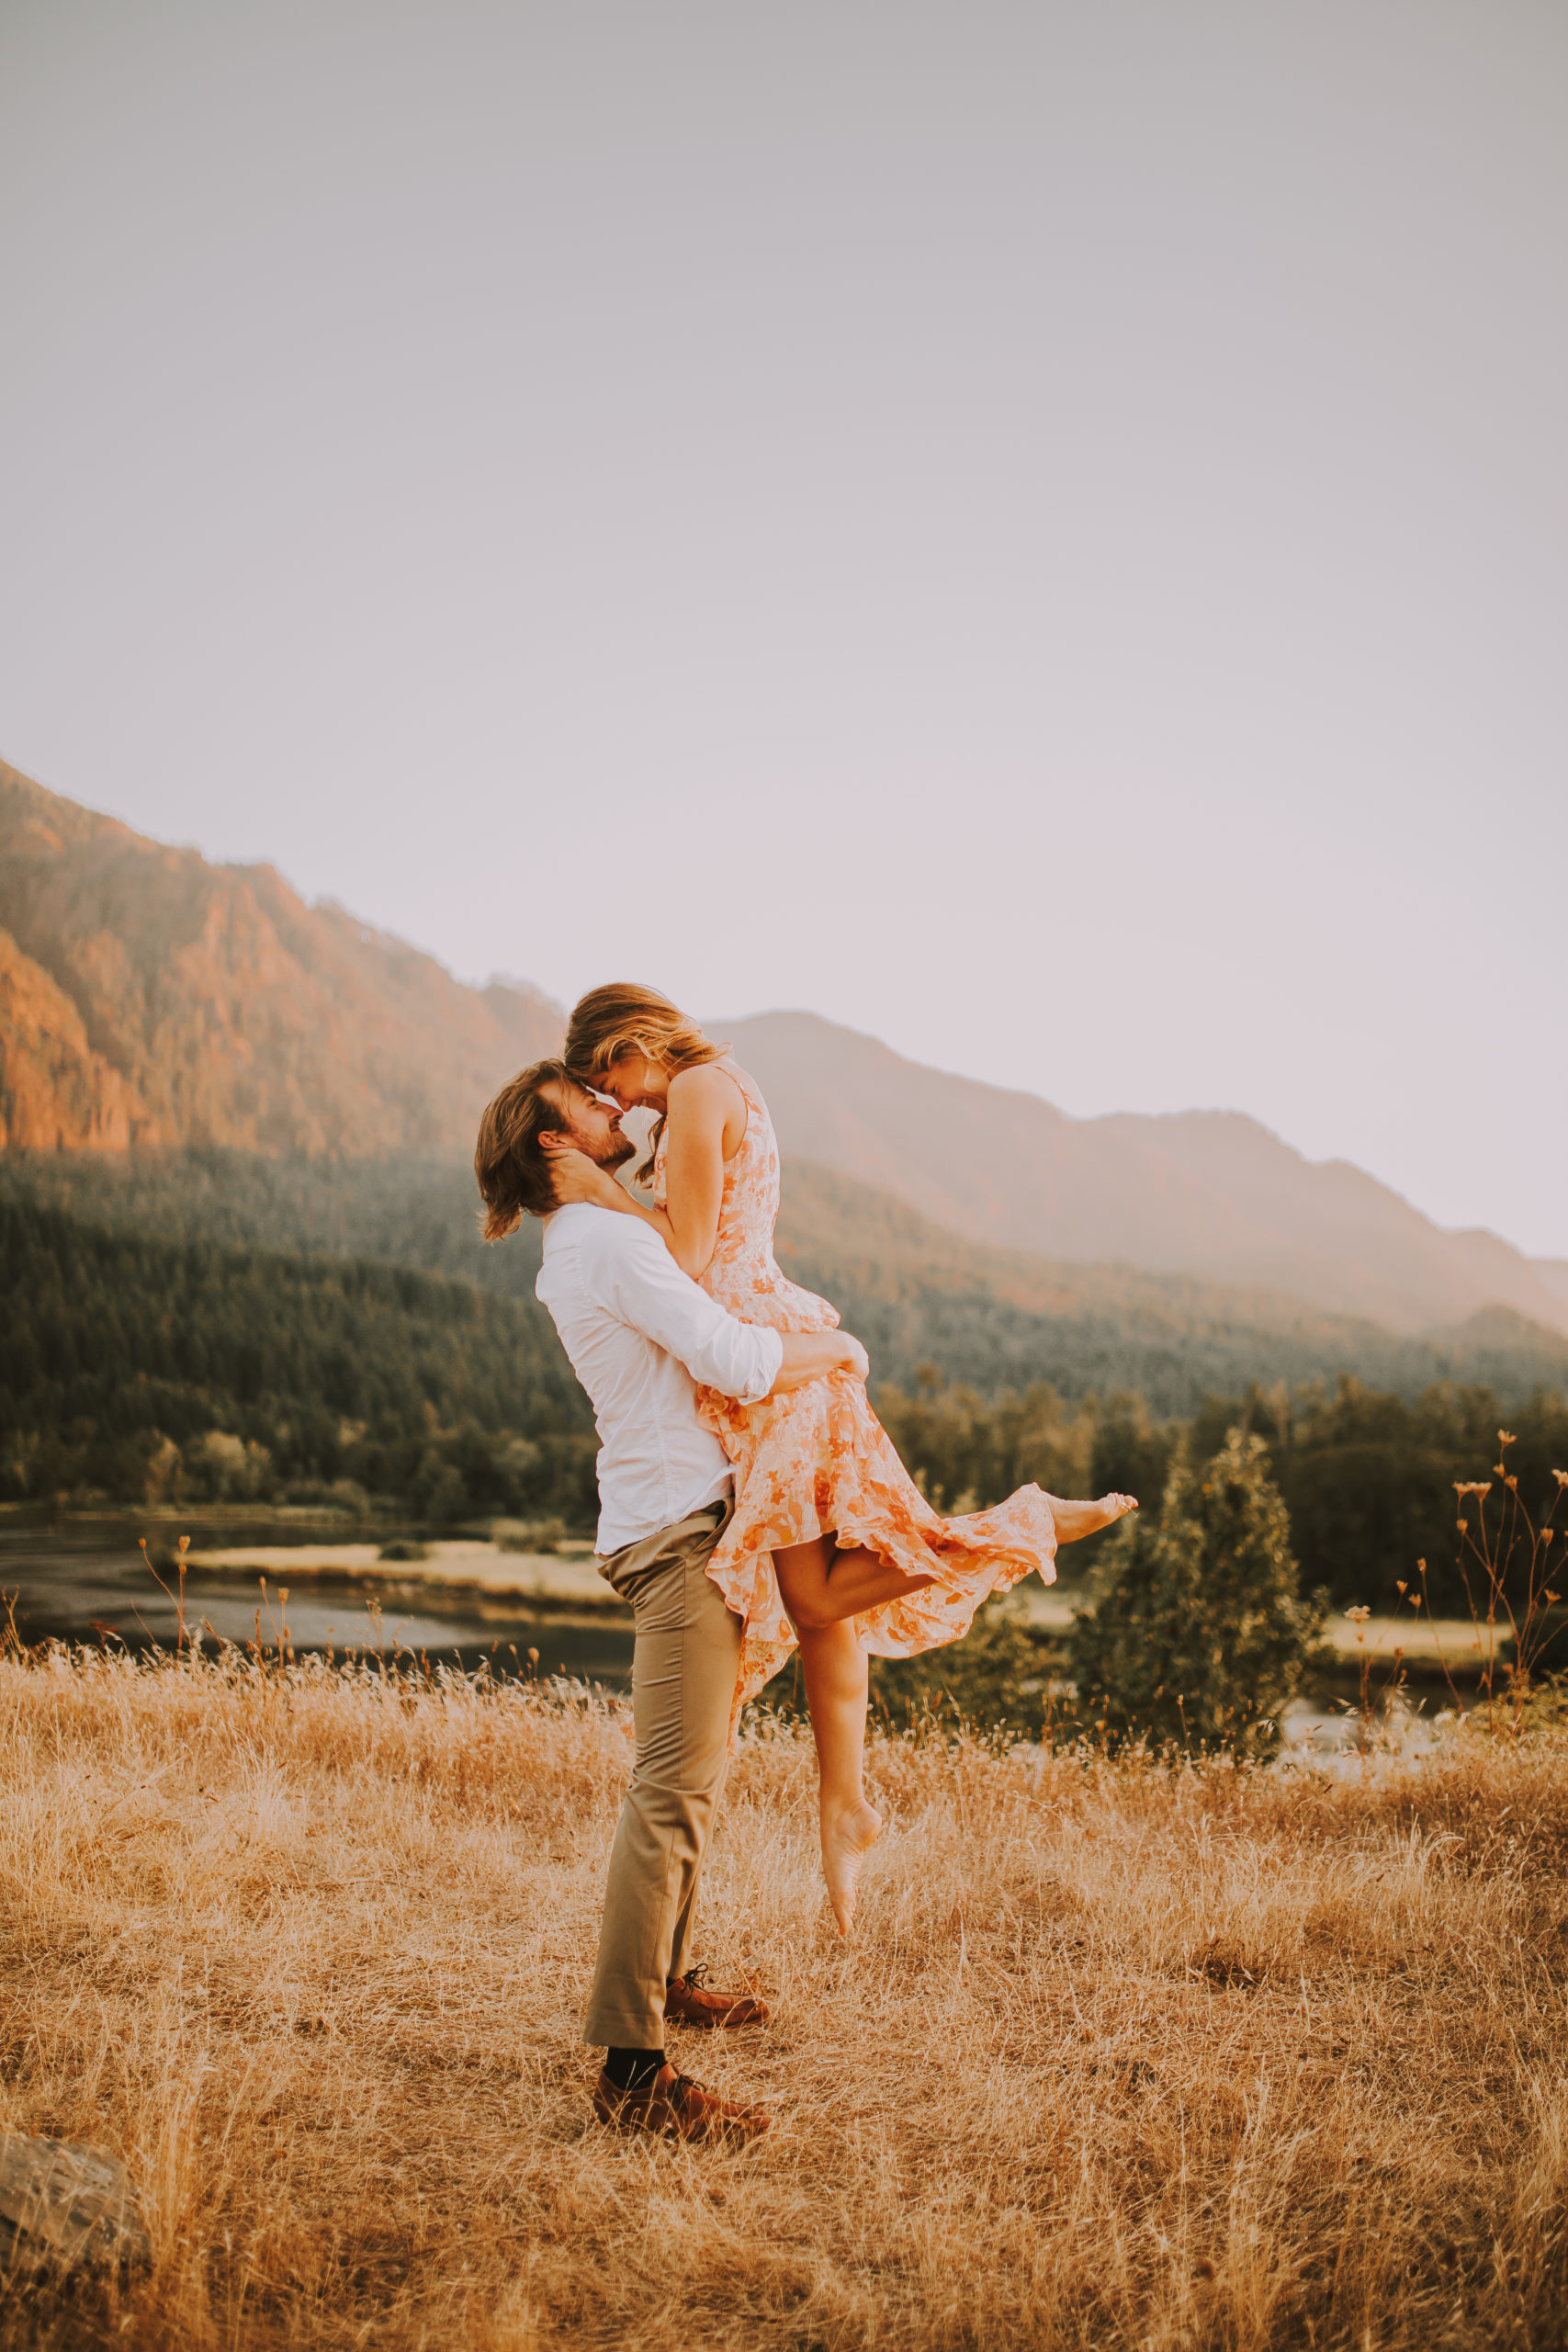 The groom lifts his bride into the air for an intimate kiss during their sunset engagement session at Columbia River Gorge in Portland, Oregon